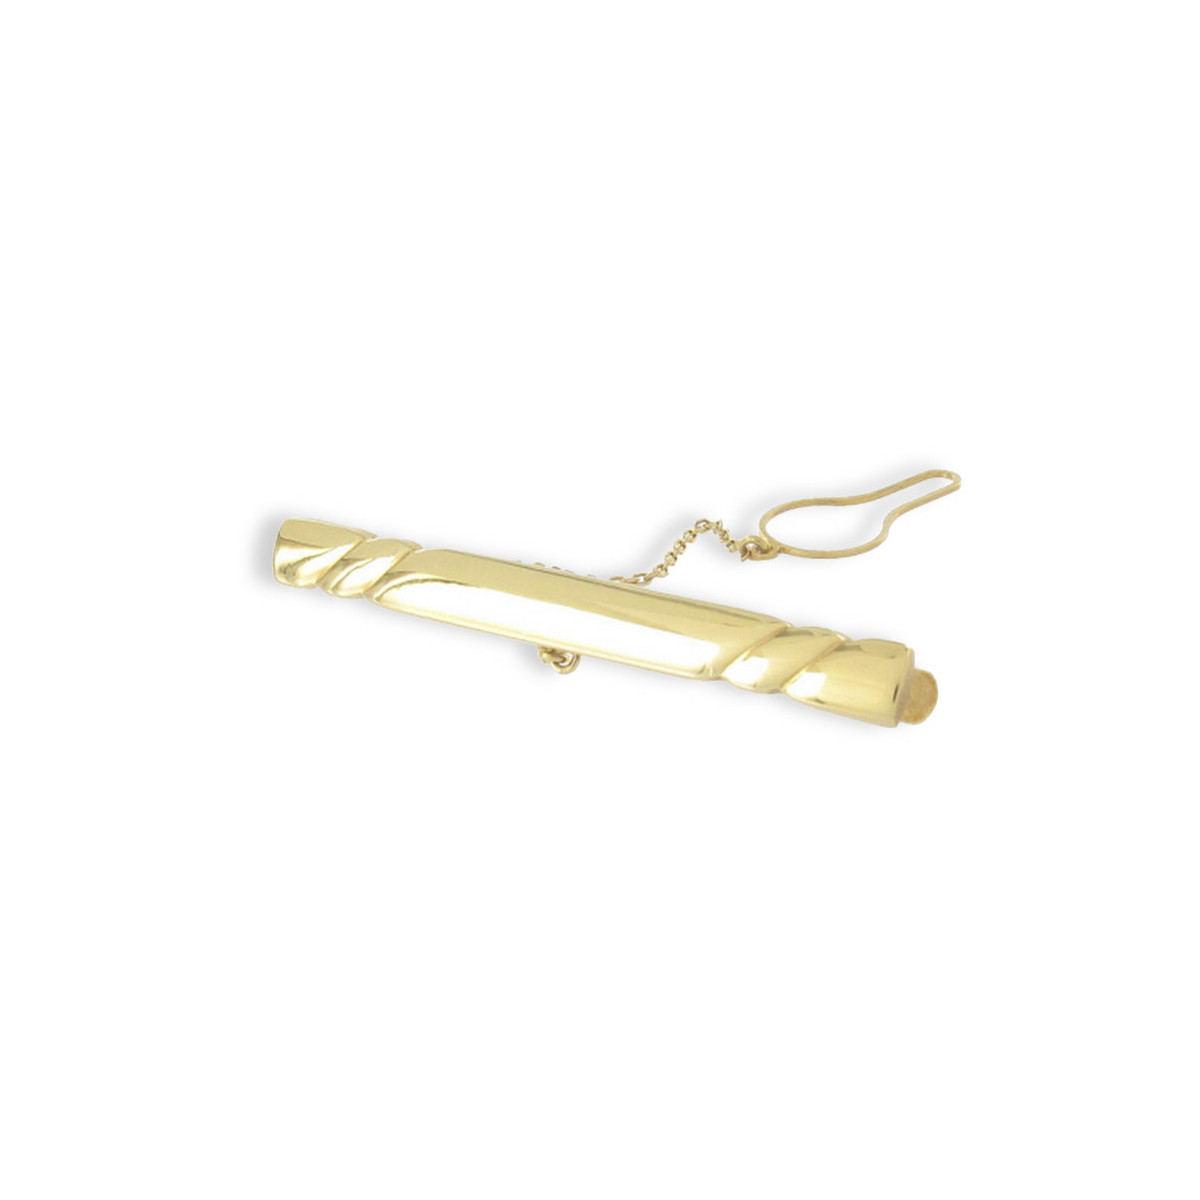 GLOSSY TIE CLIP WITH DECORATION AT ENDS